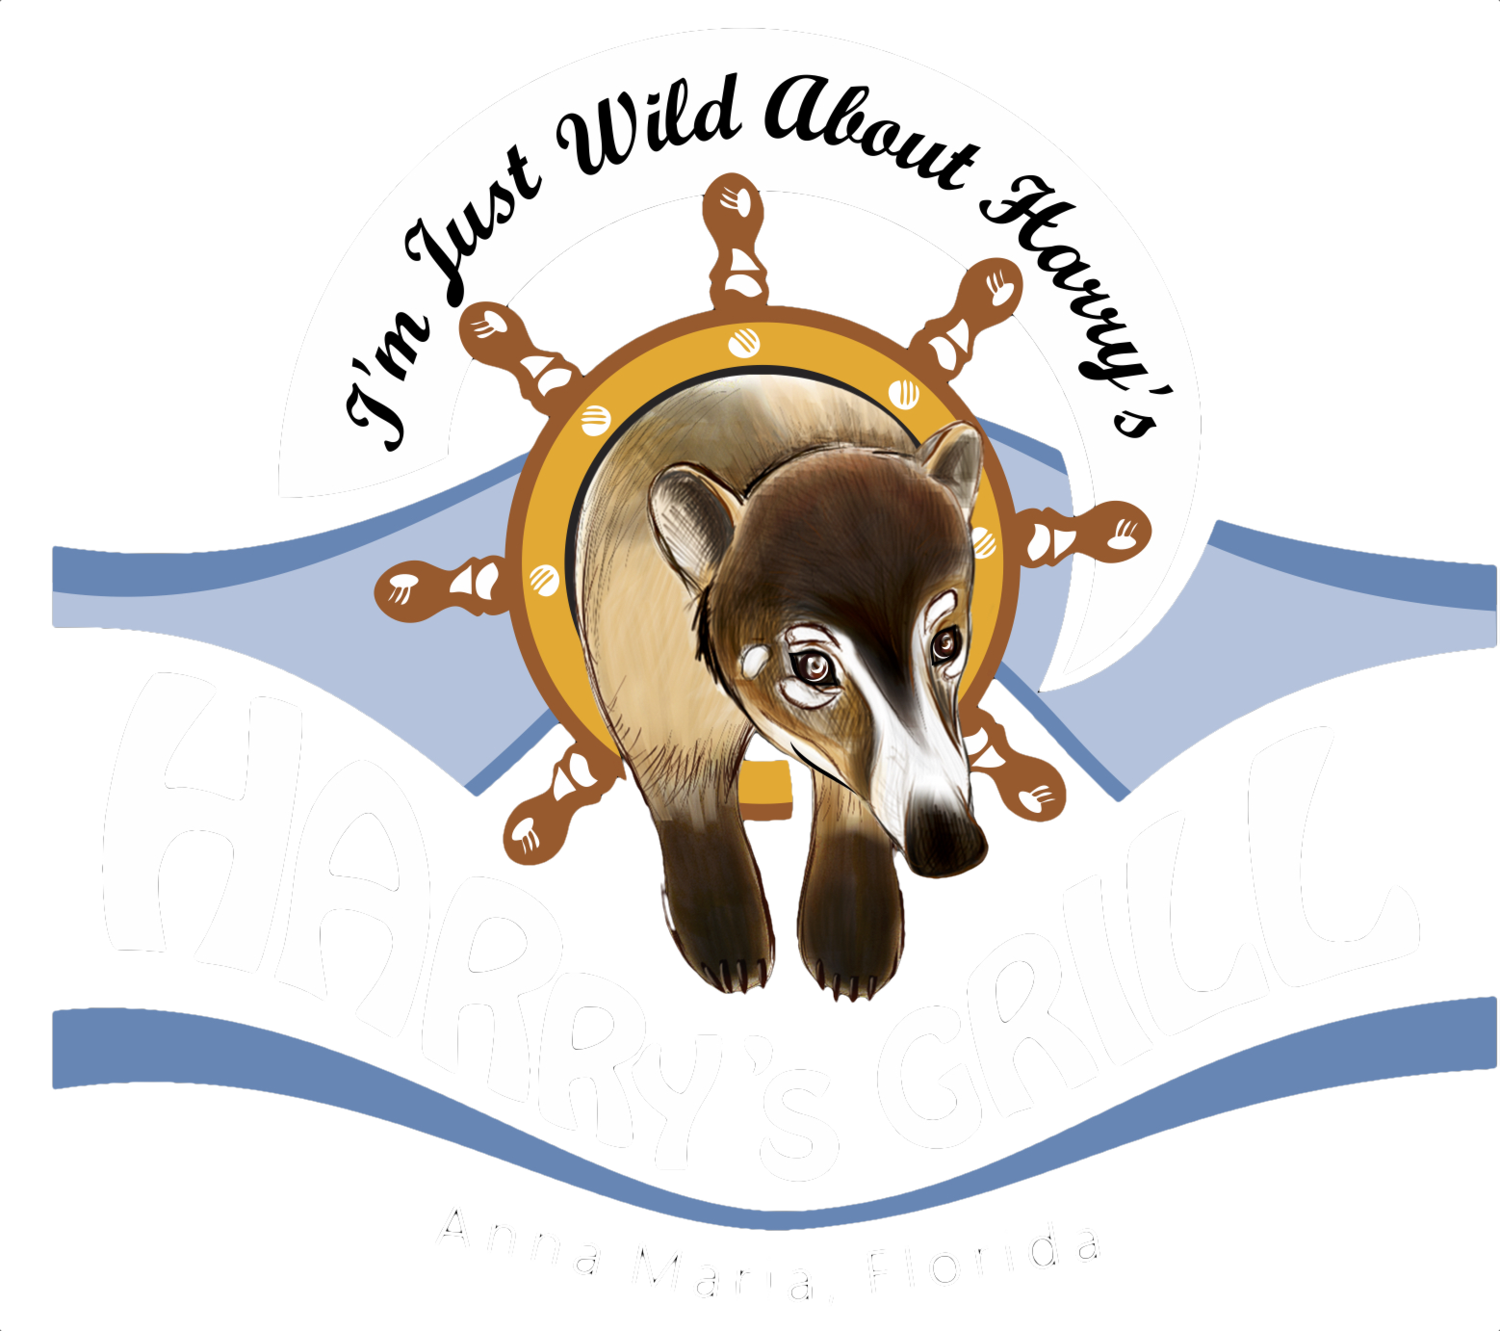 Clipart restaurant bistro. Harry s grill and